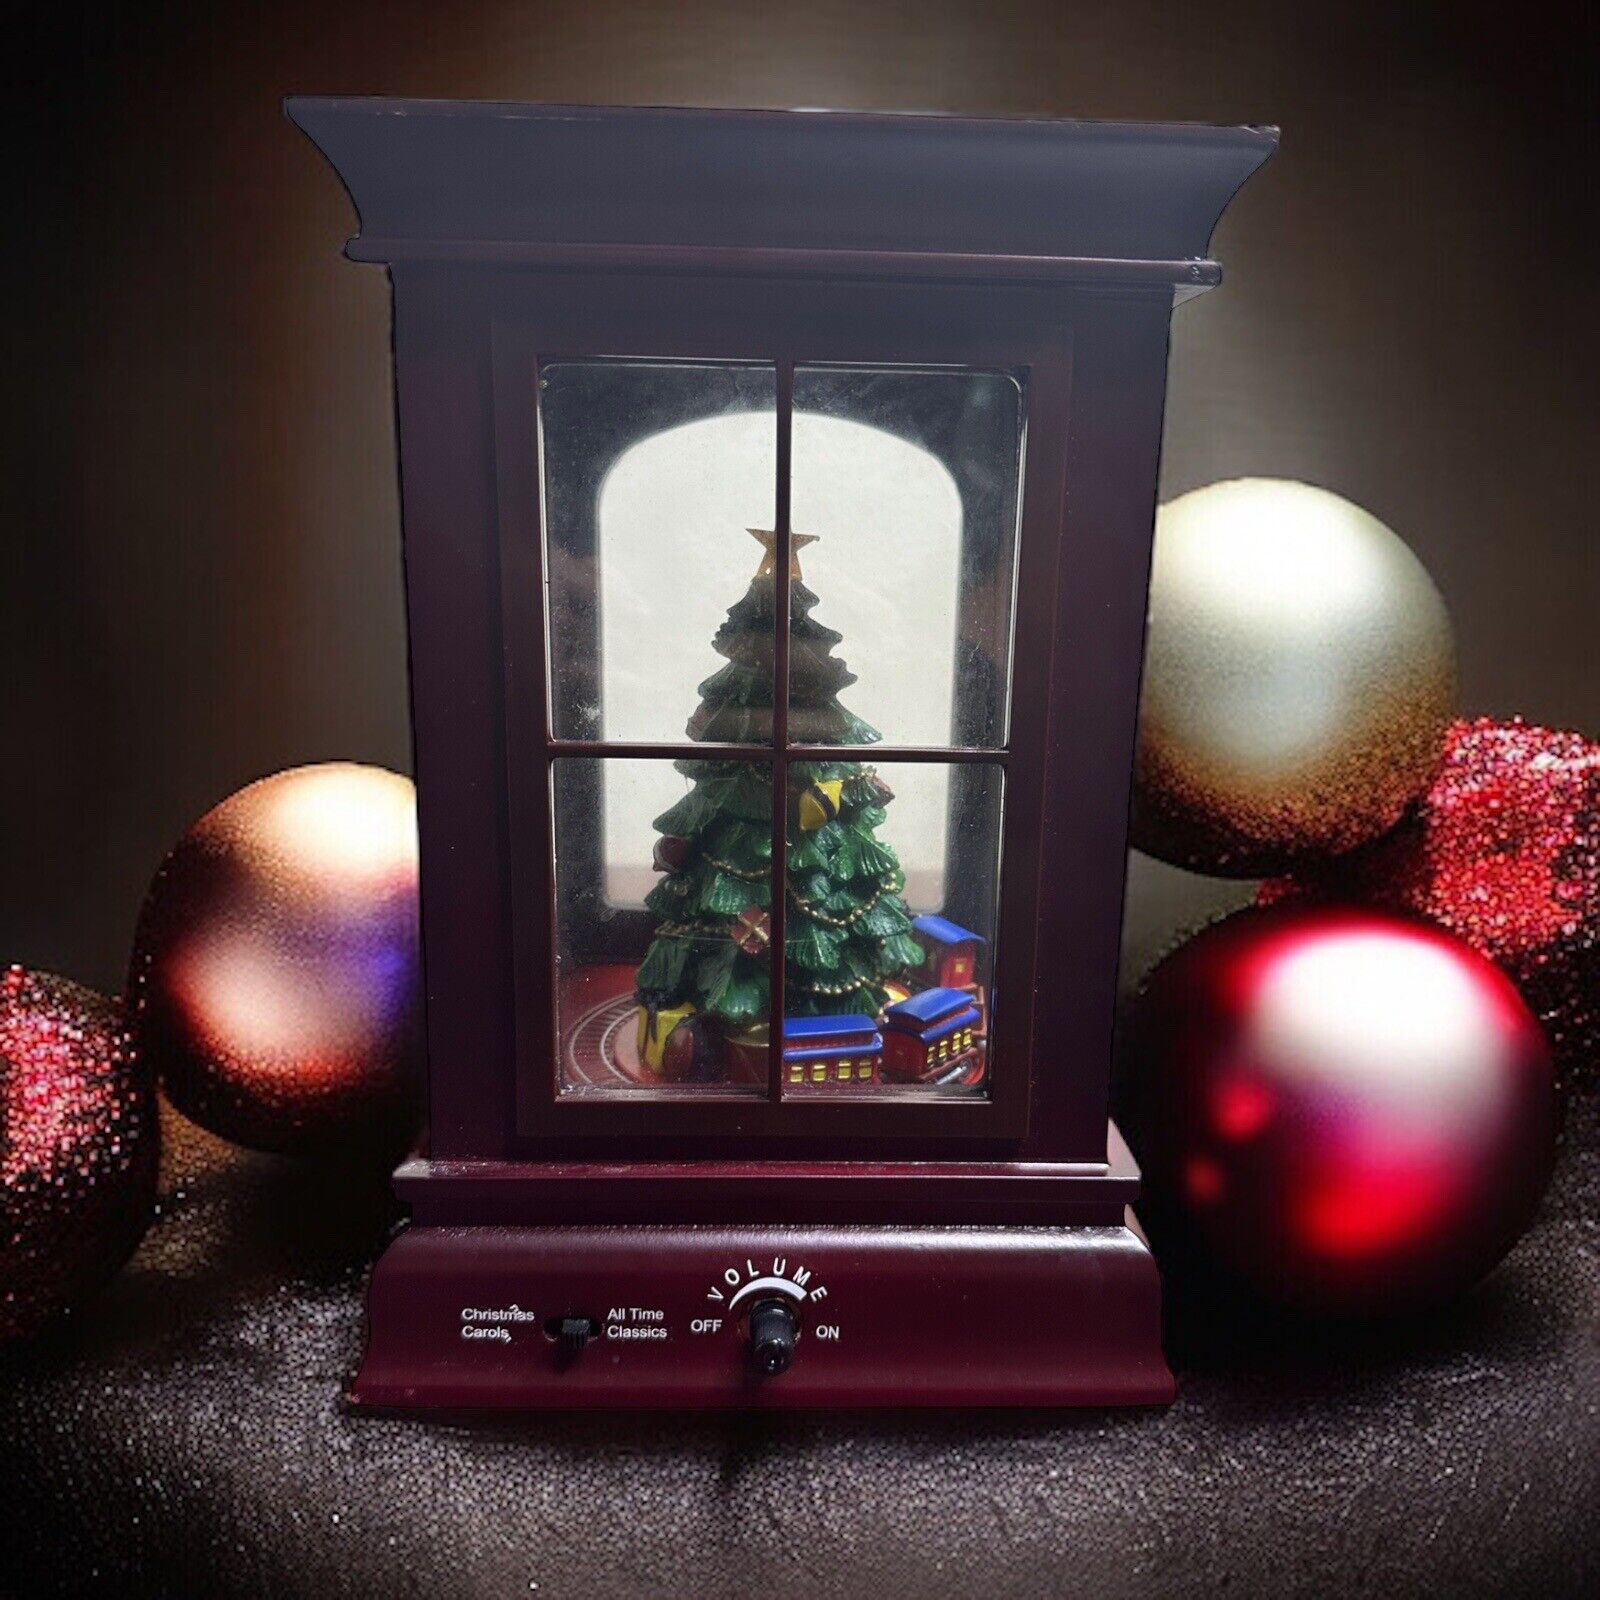 Mr. Christmas Musical Curio Cabinet TREE TRAIN Animated VIDEO no power adapter